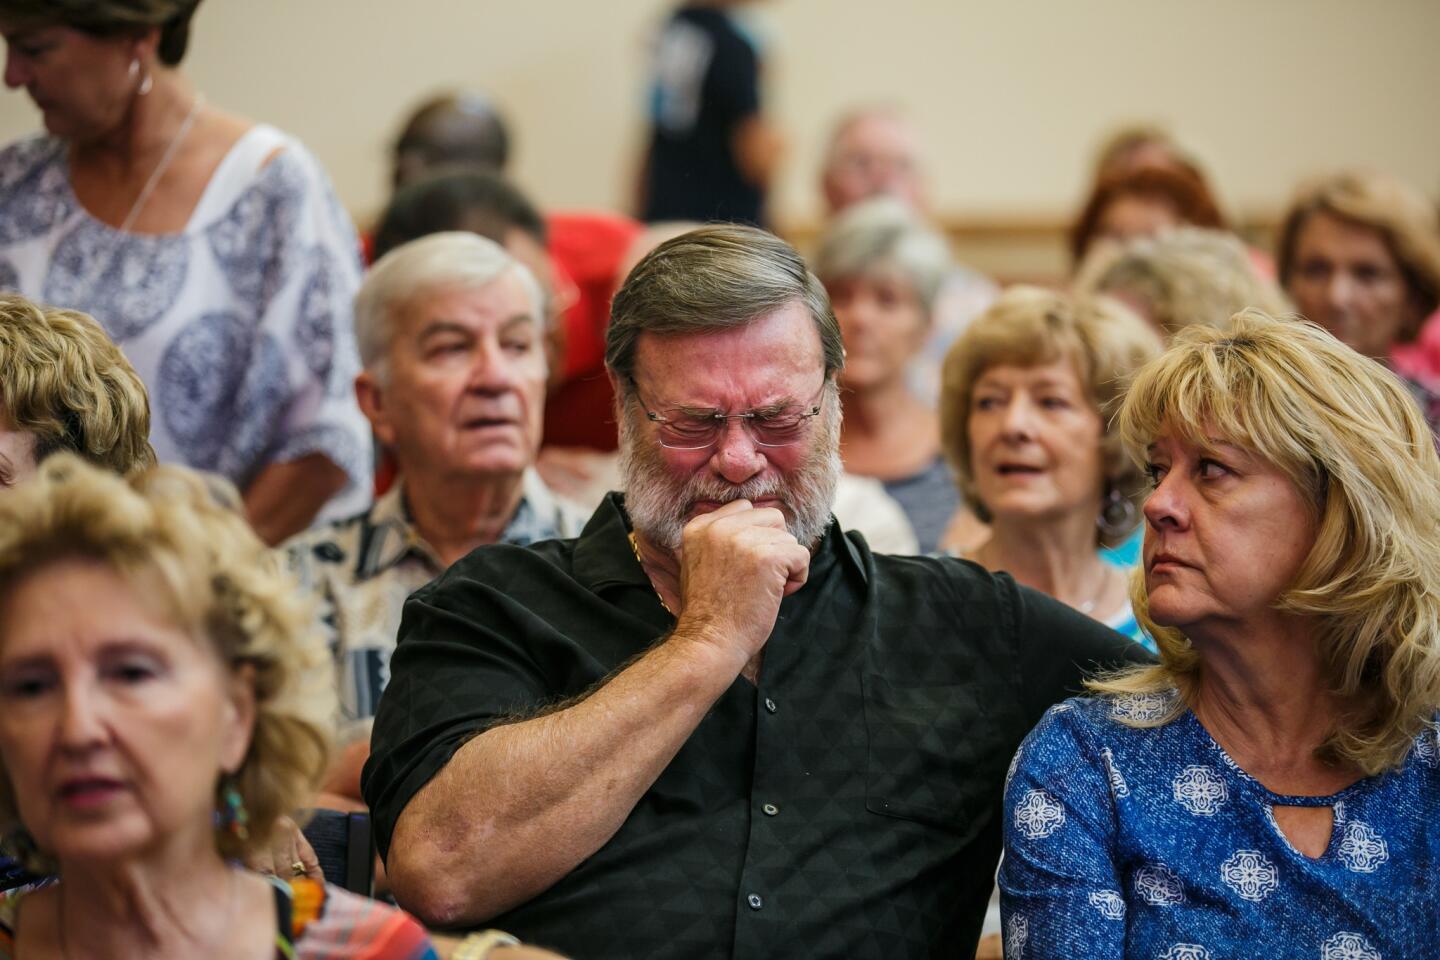 Wayne Christopher, center, weeps as his wife, Helen Christopher, looks on during the first Sunday service since Tropical Storm Harvey caused widespread flooding and damaged the First United Methodist Church.